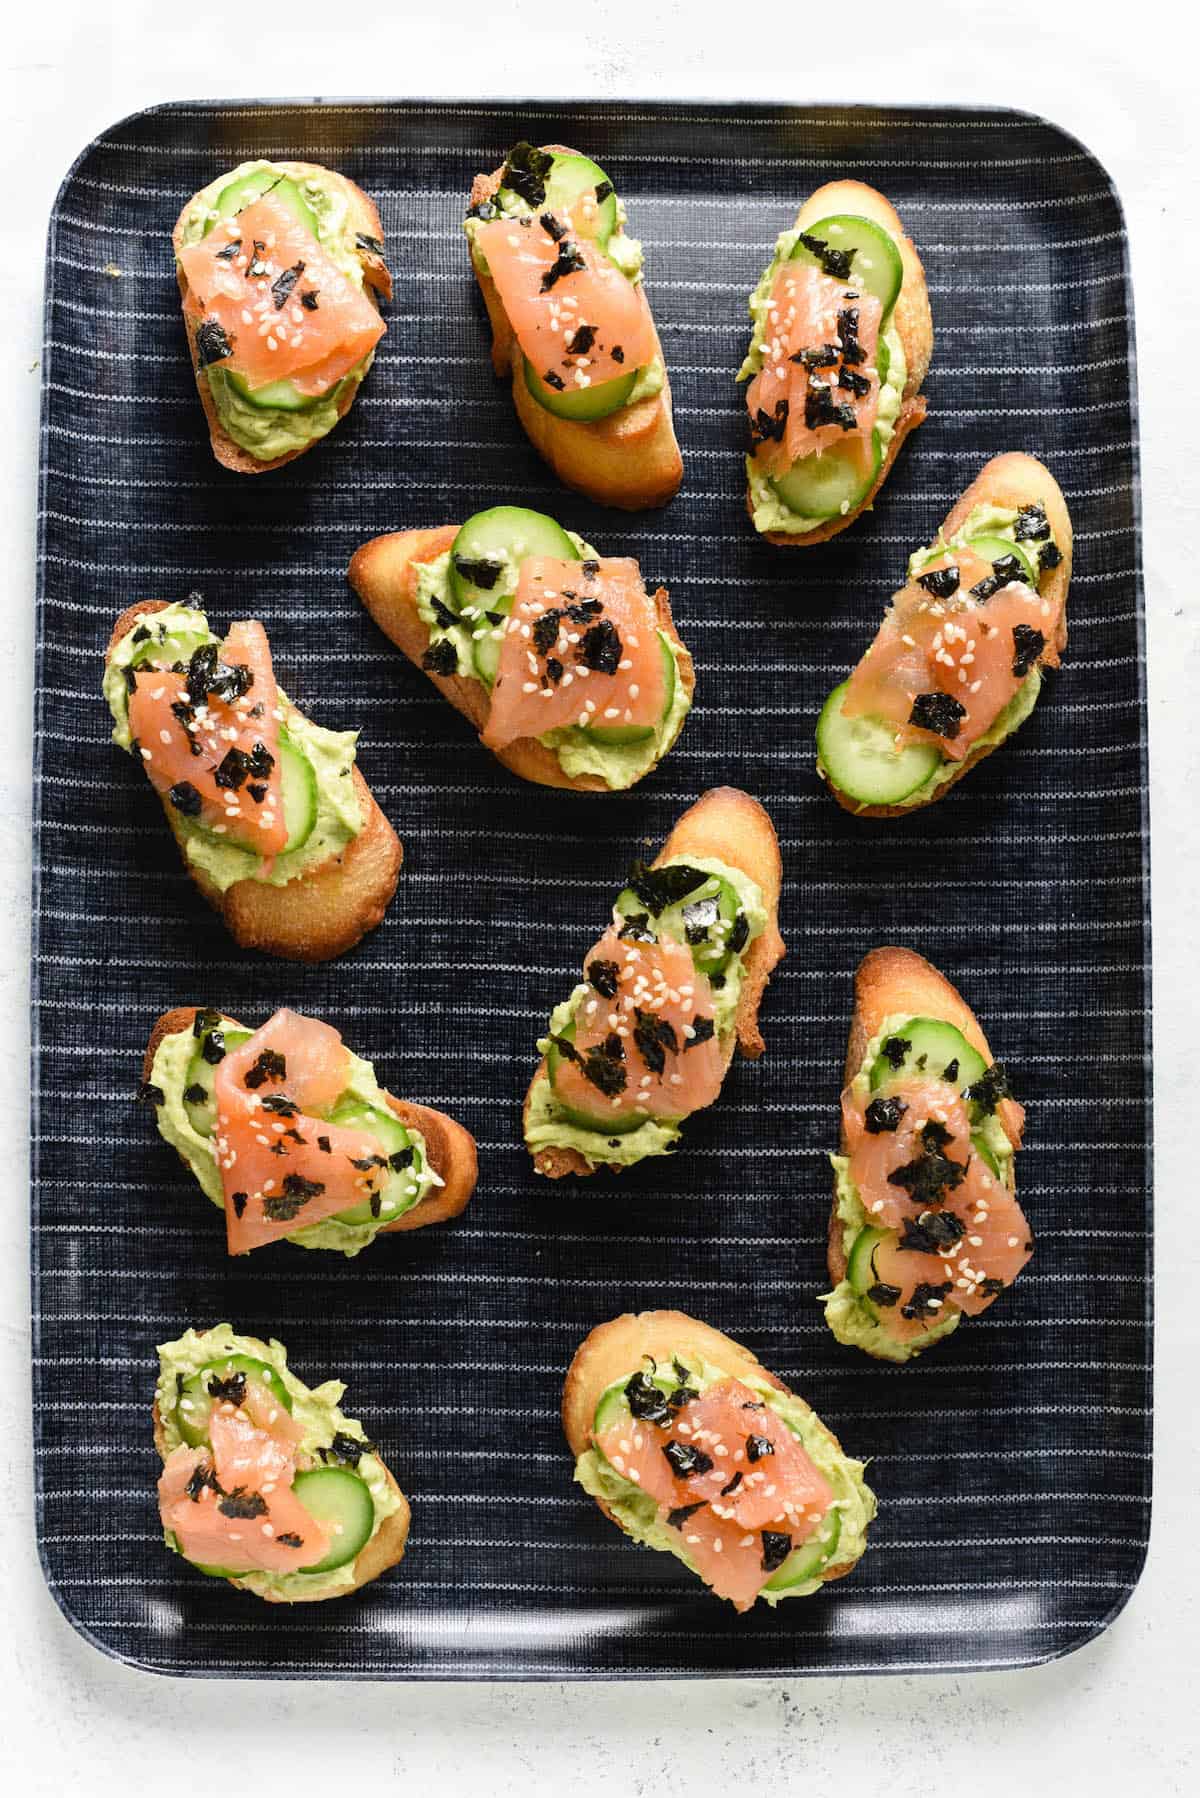 Avocado, salmon and cucumber crostini arranged on blue and white striped tray.